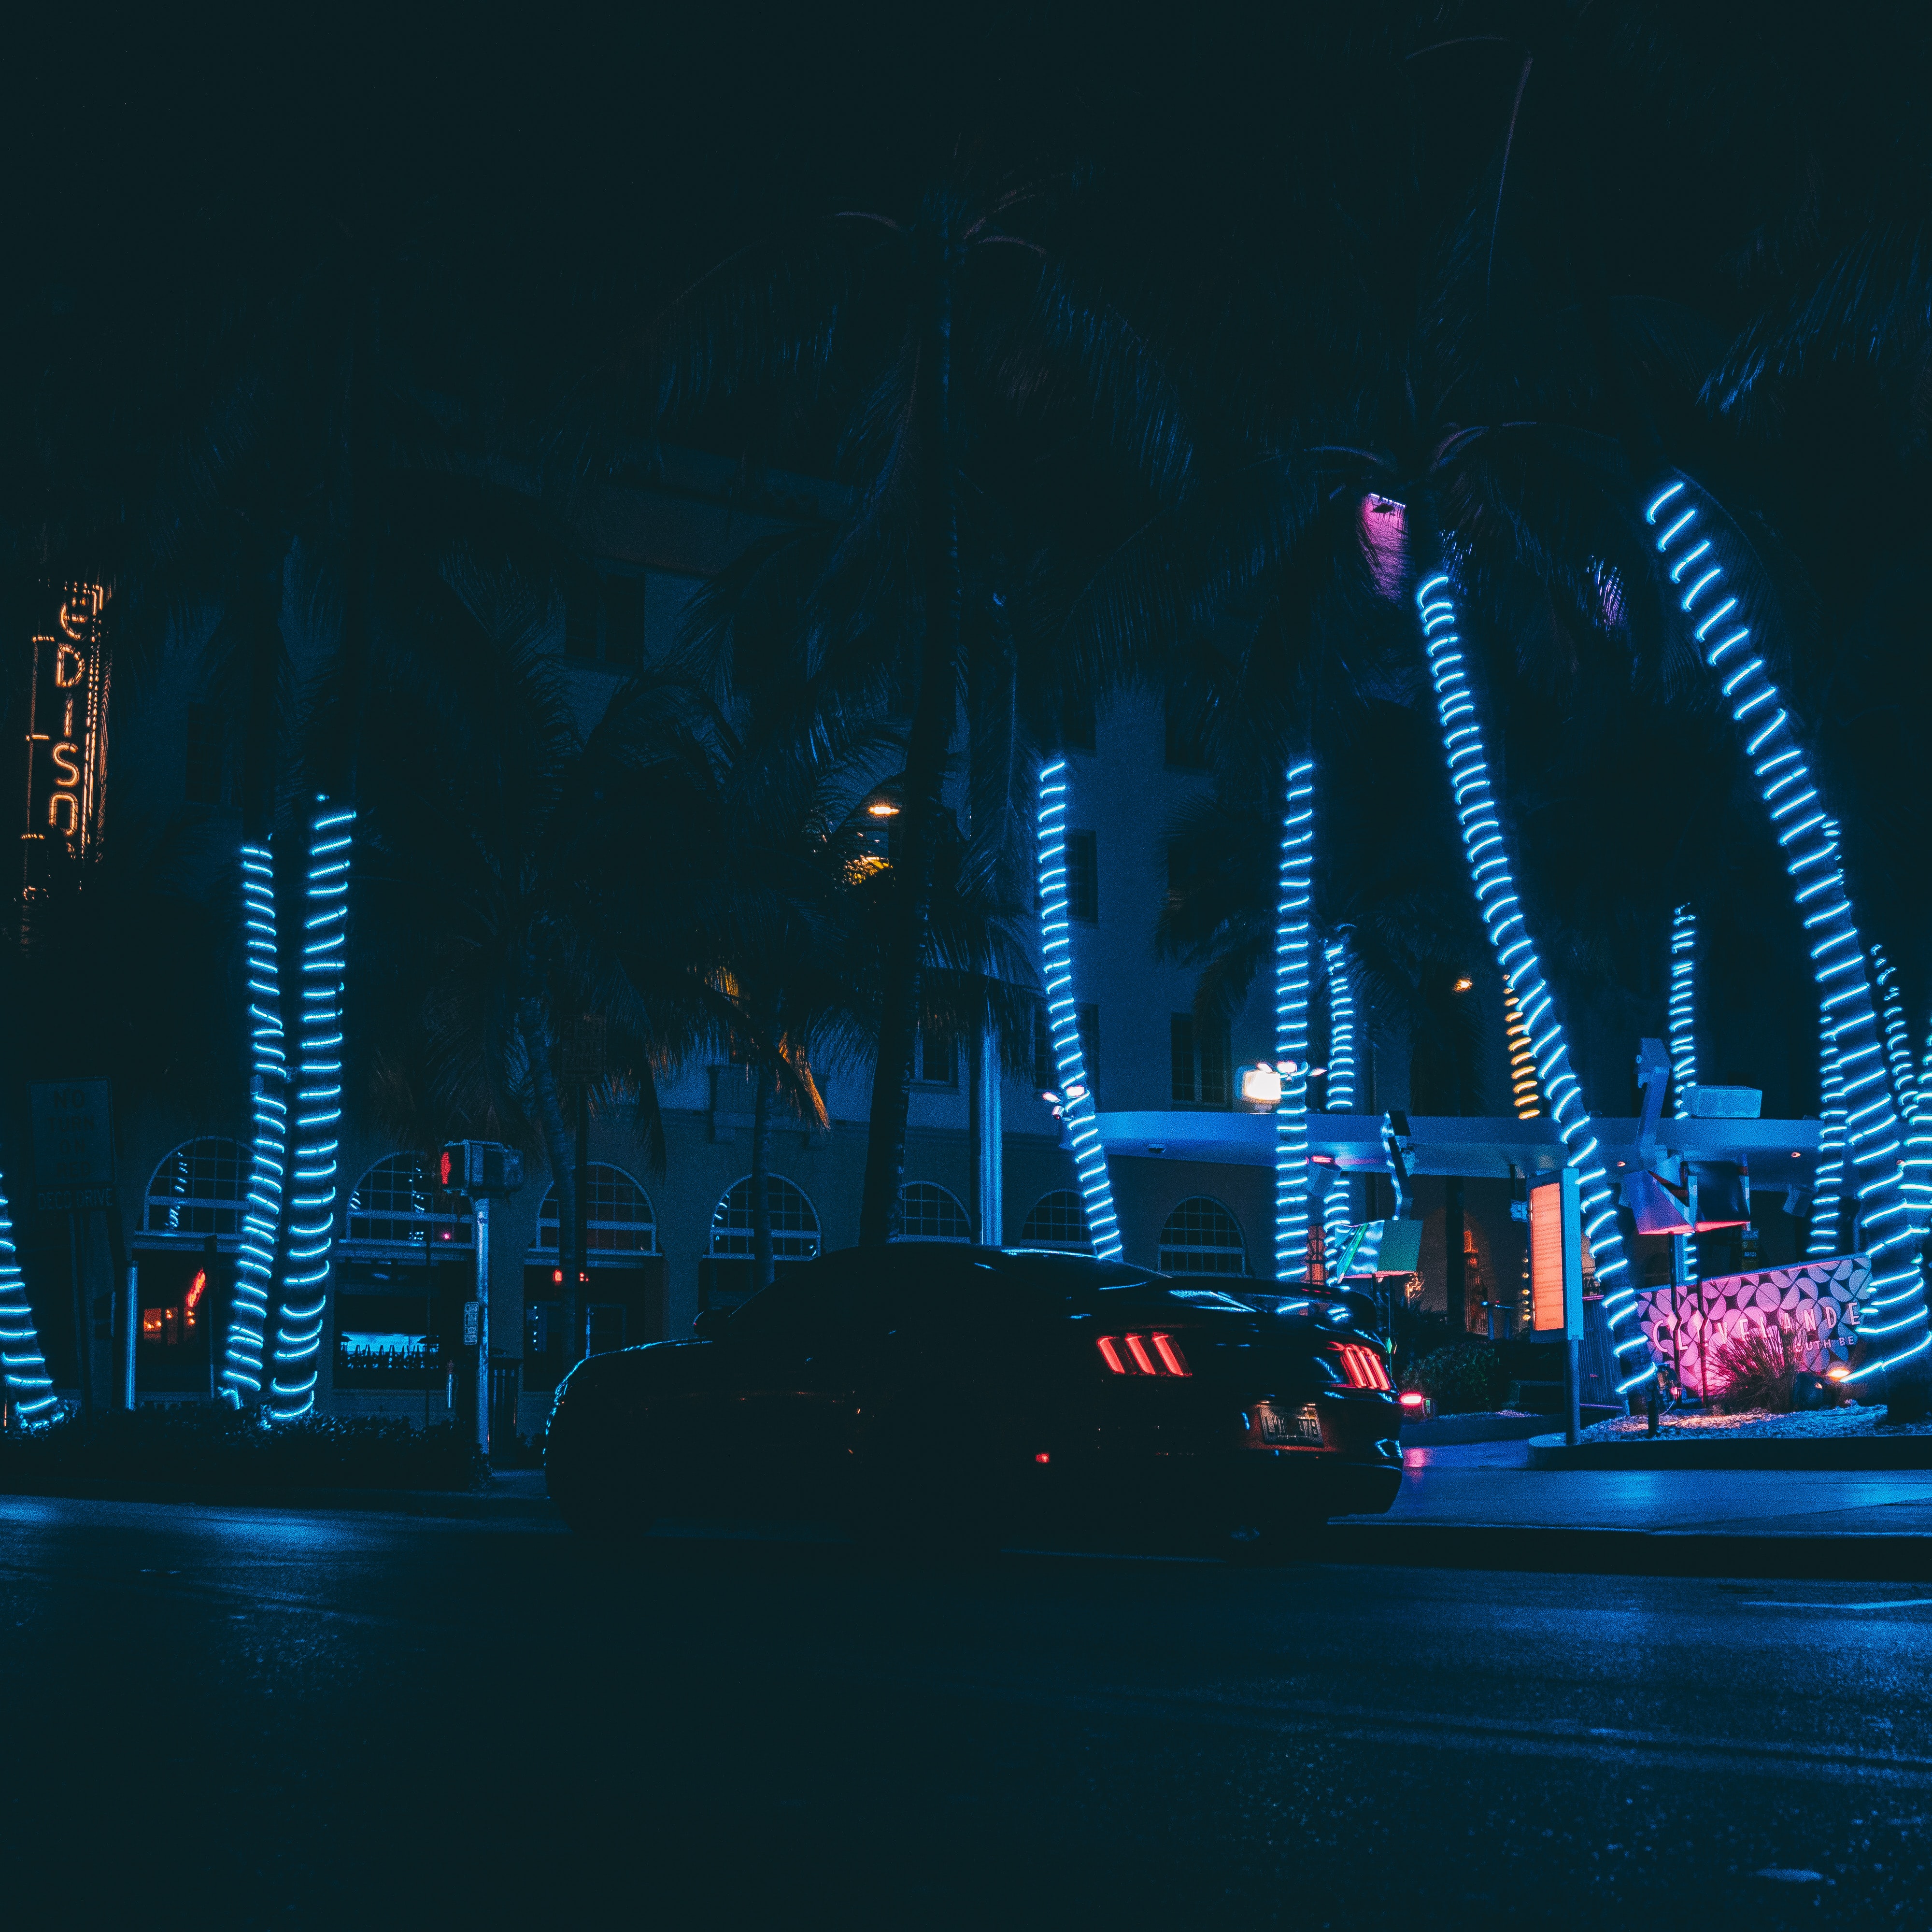 android car, sports car, night city, neon, sports, palms, cars